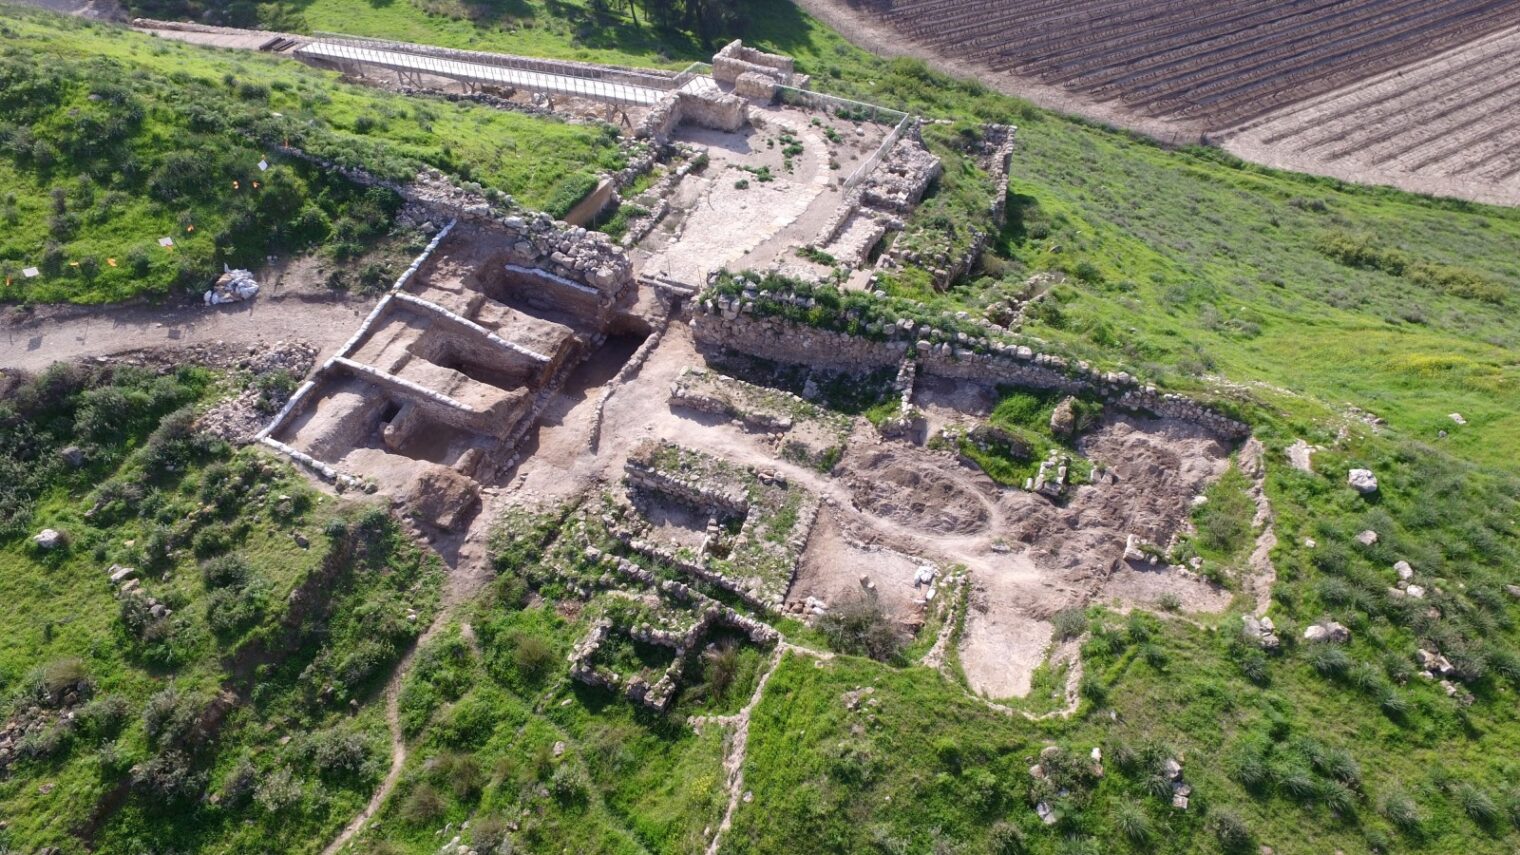 The Tel Lachish National Park and the exposed gate structure, left. Photo by Guy Fitoussi/Israel Antiquities Authority